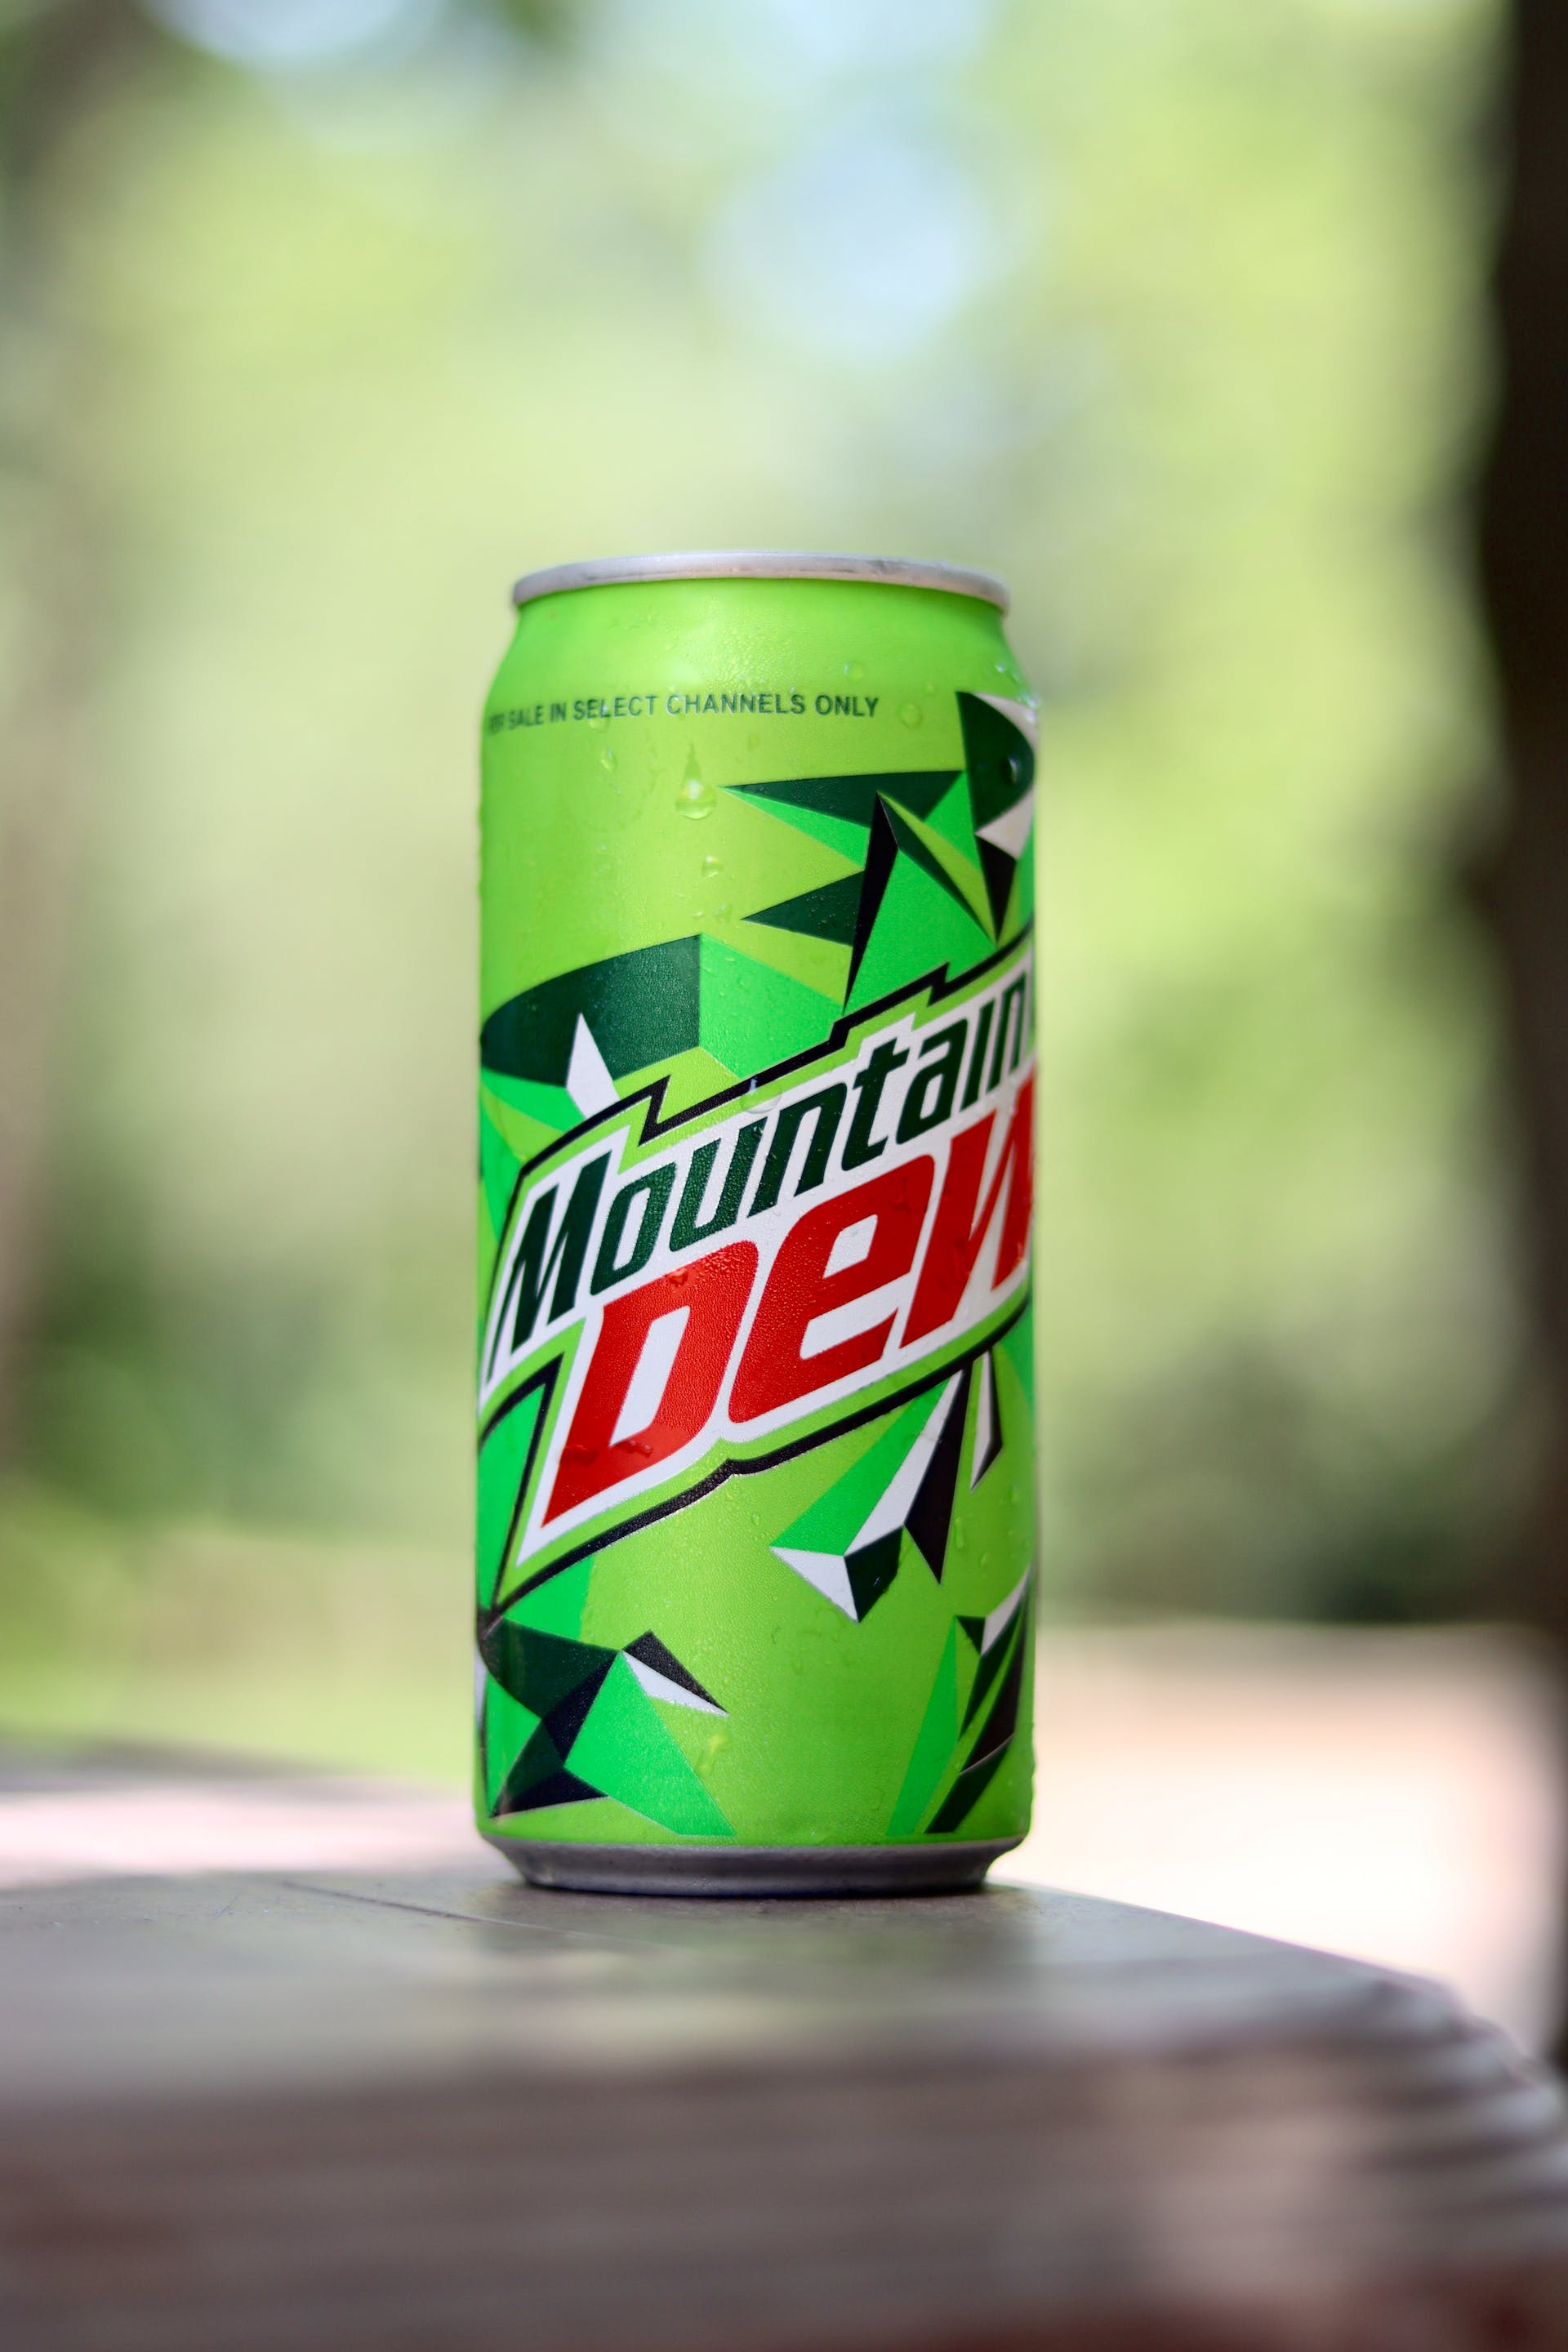 A Mountain Dew can | Source: Pexels